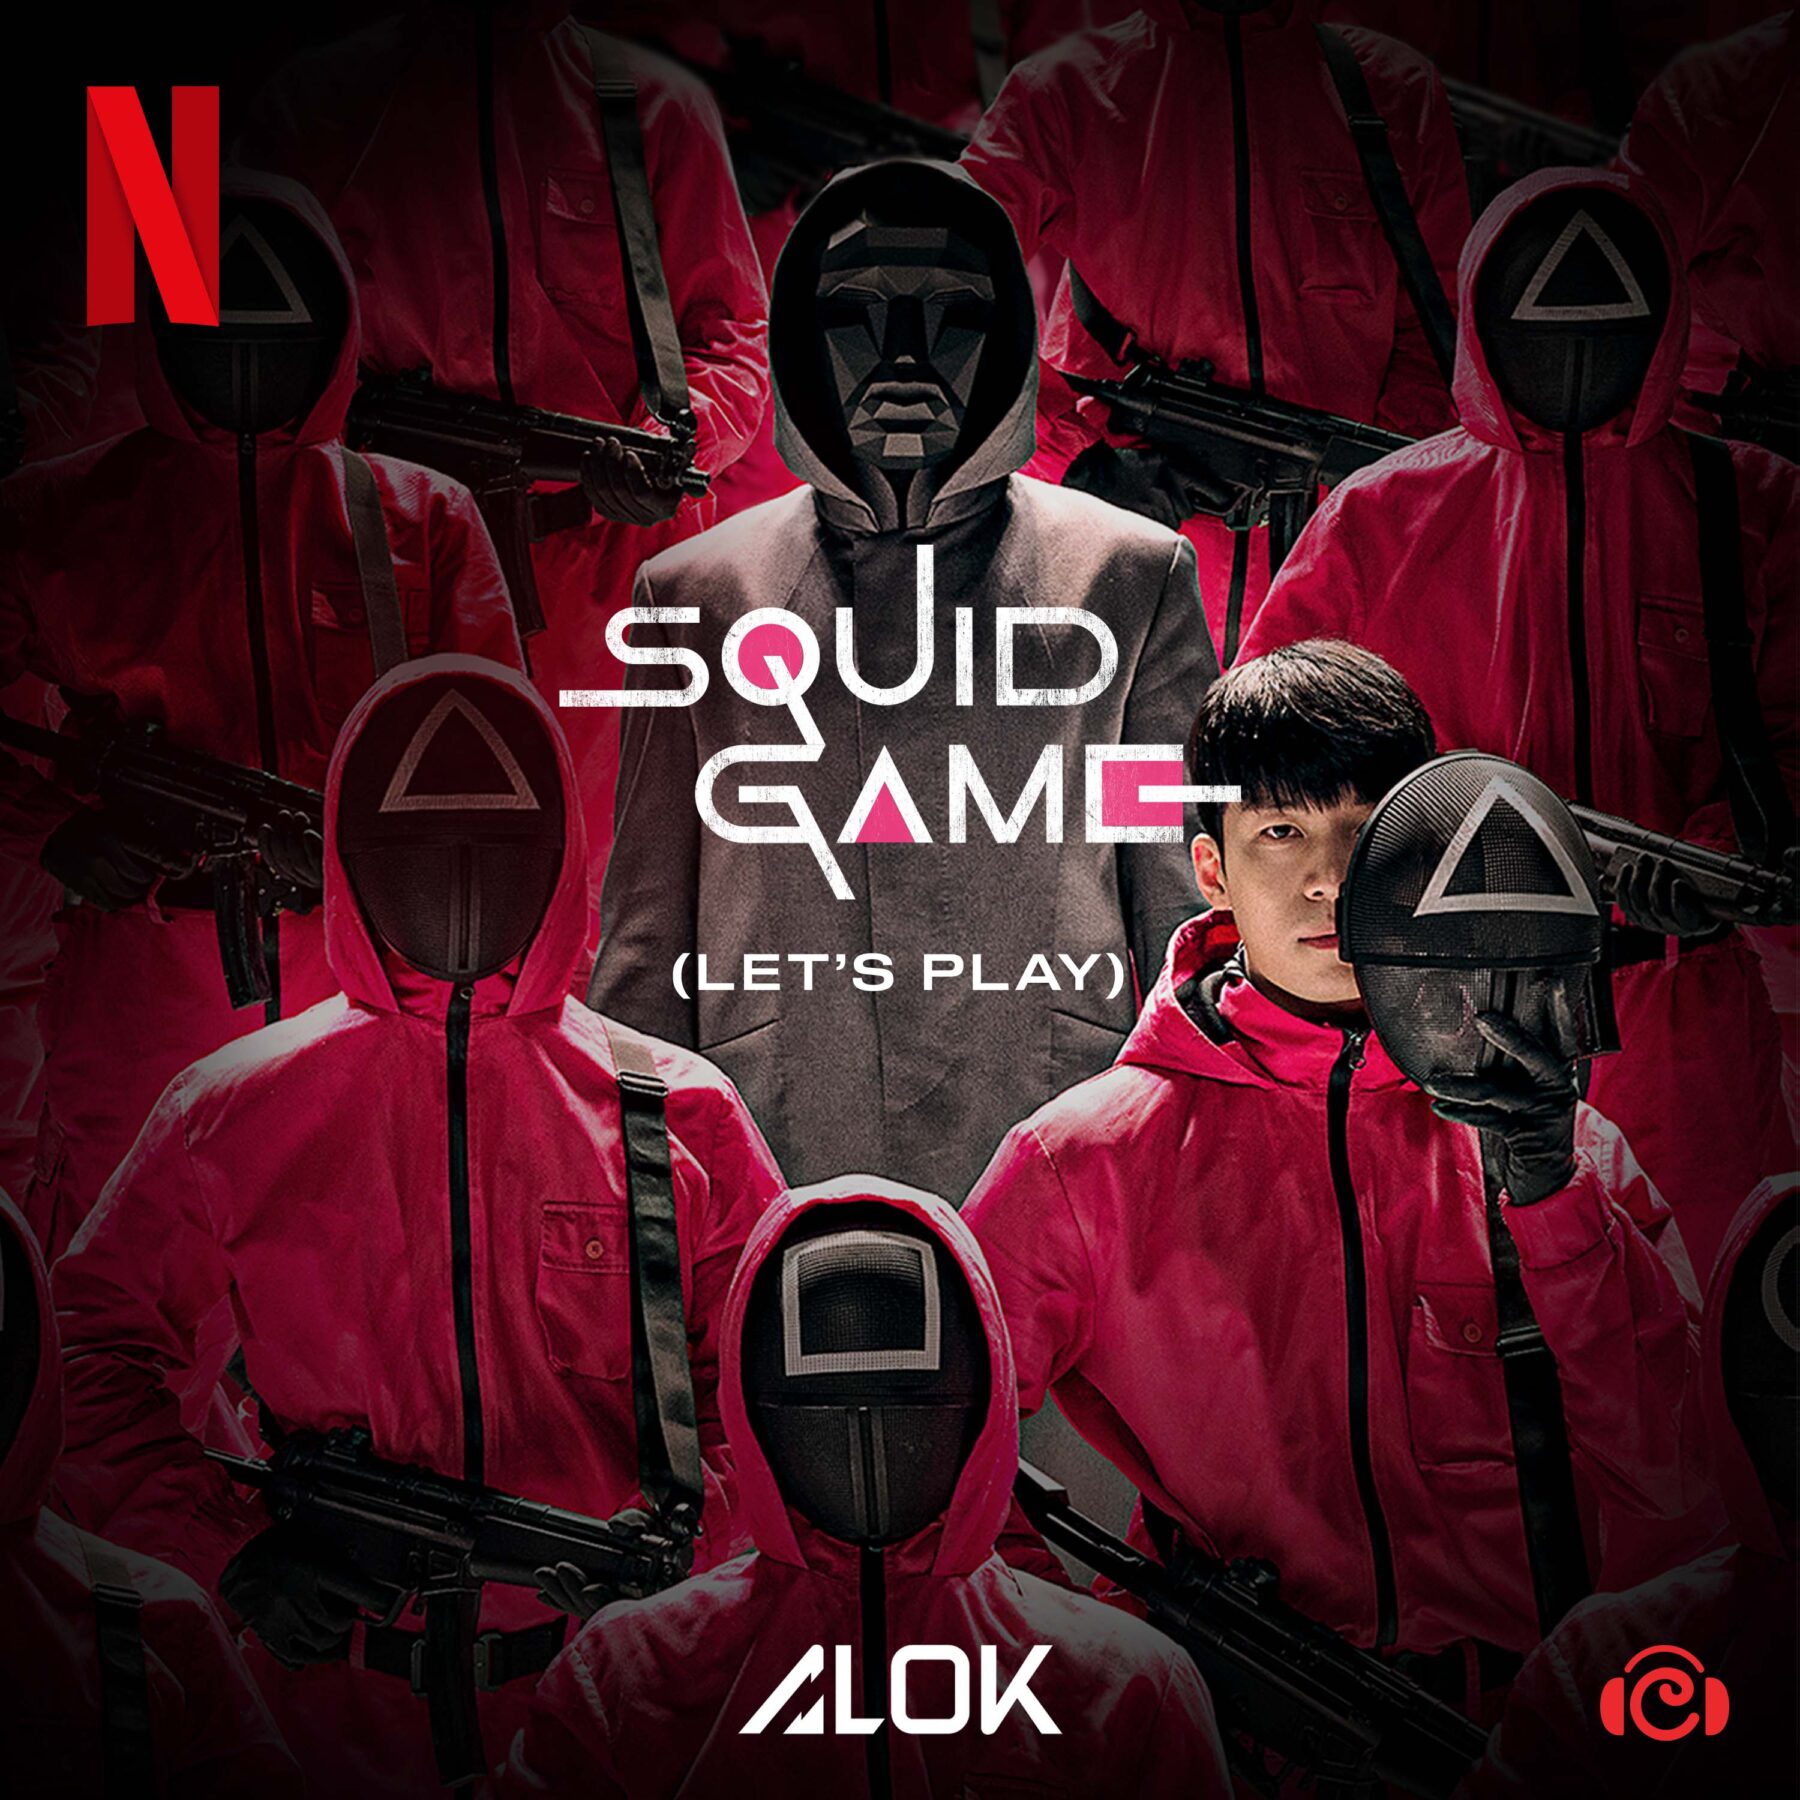 Alok Squid Game NETFLIX COVER